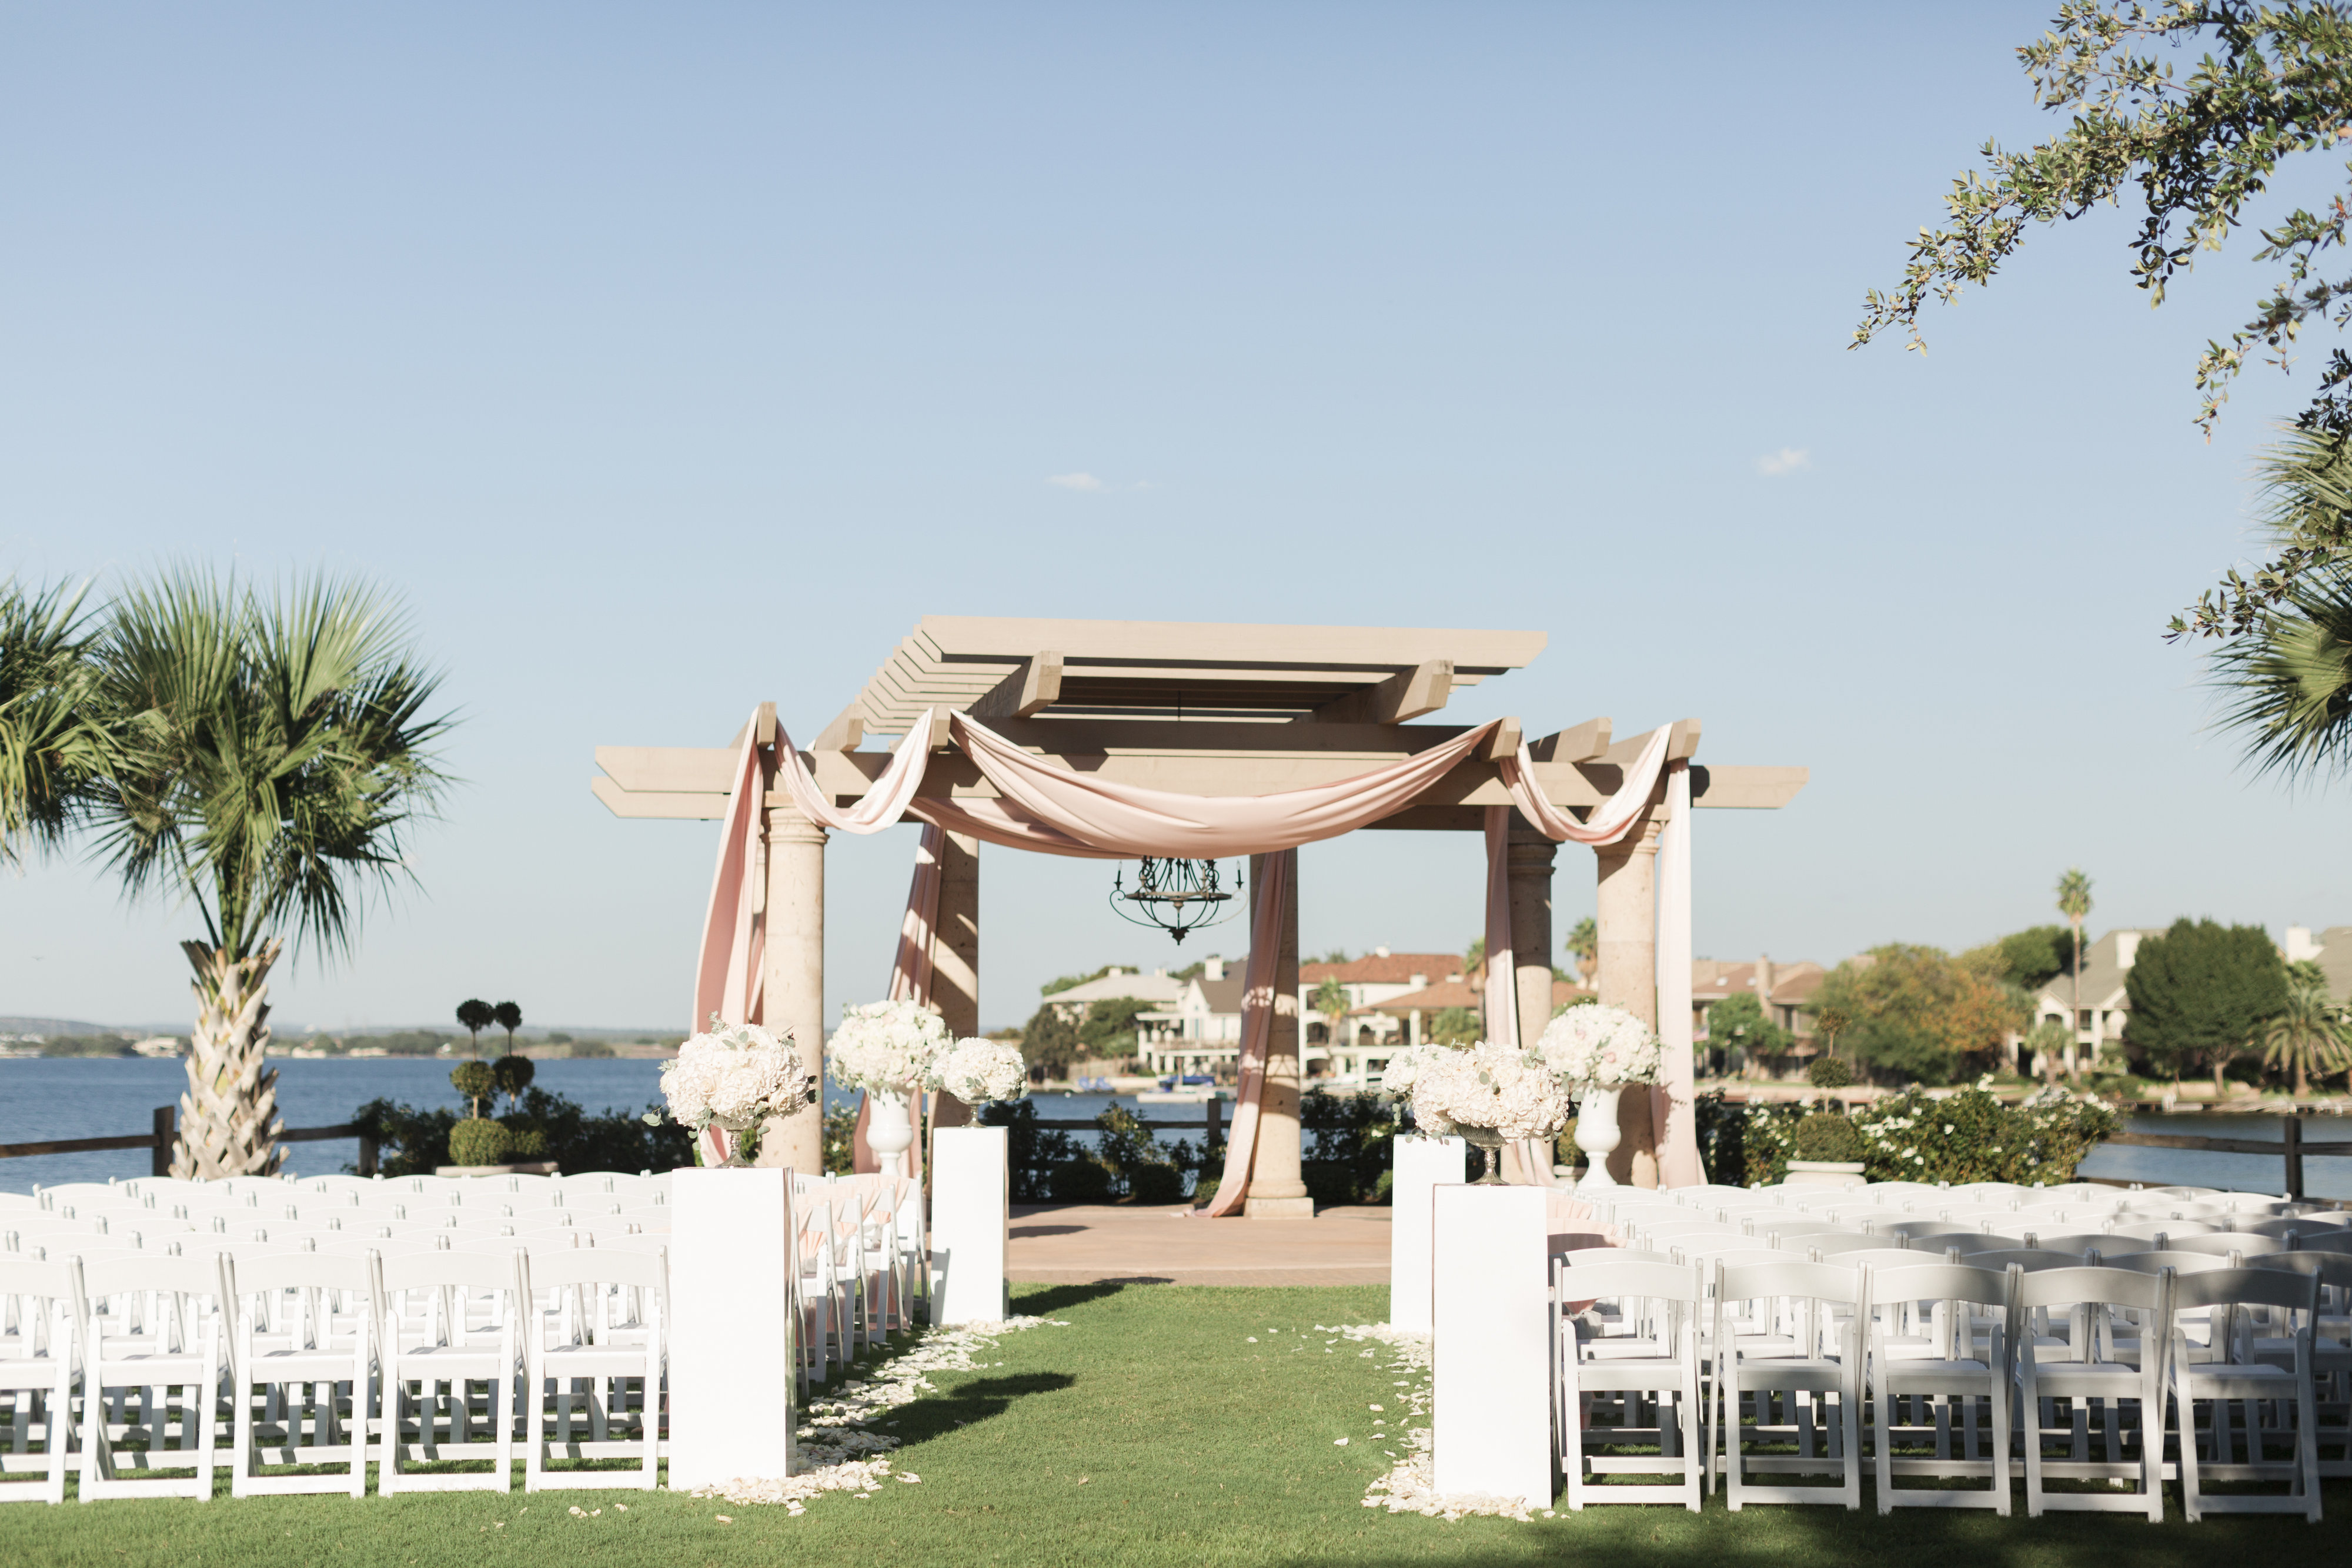 View More: http://angelalallyphotography.pass.us/wedding-feng-cici